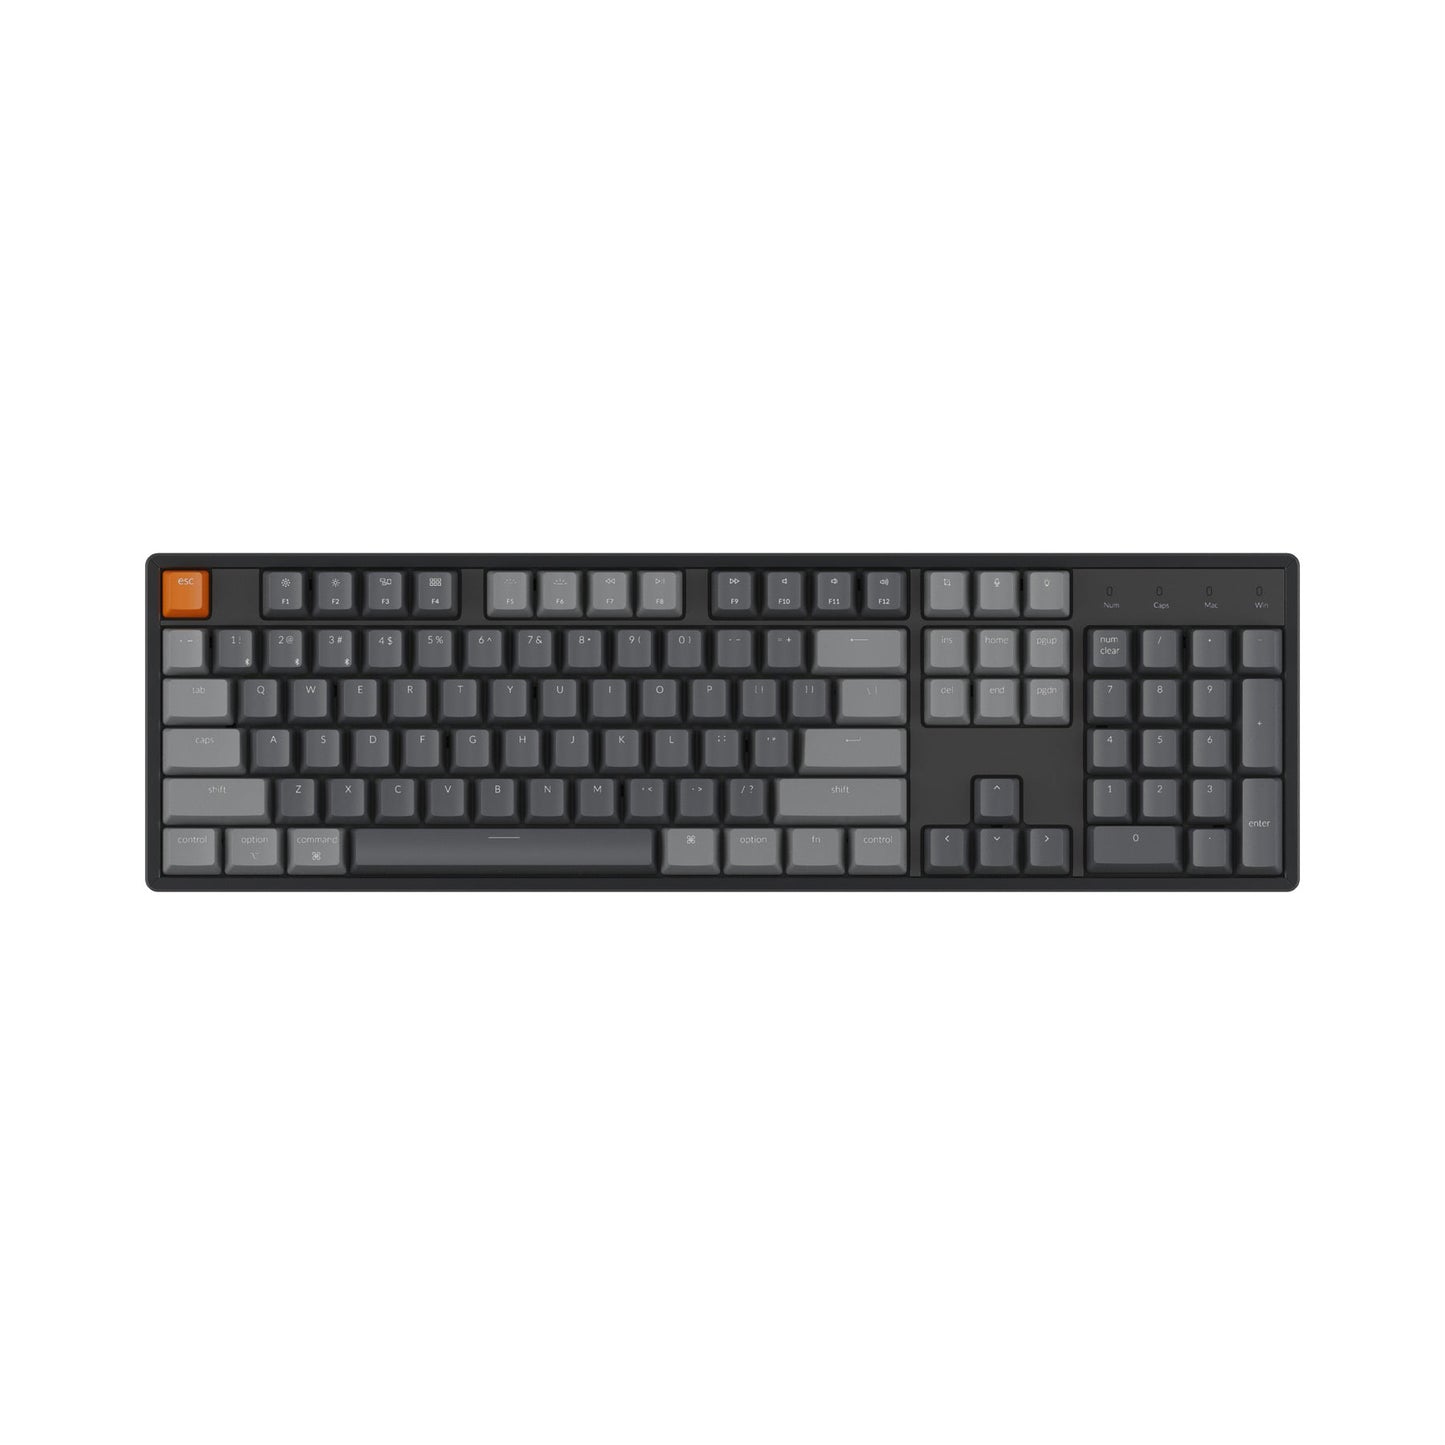 Keychron K10 104 Keys Bluetooth Wireless / Wired Full Size Mechanical Keyboard with Hot Swappable Switches, RGB Backlight and Aluminum Frame for Mac and Windows PC Computer (Brown Tactile) K10C3